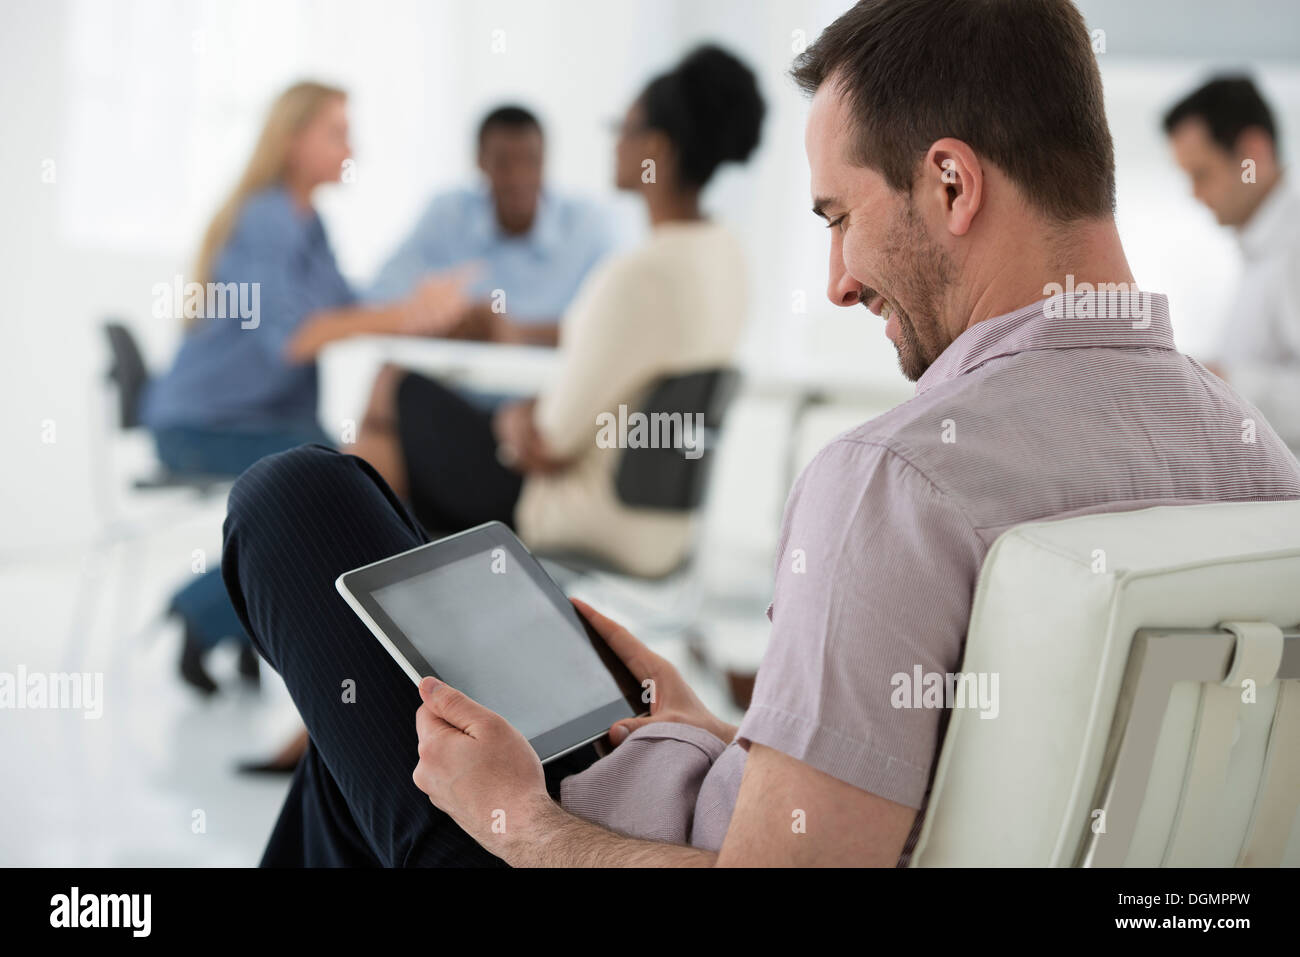 Office interior. Meeting. One person seated separately, using a tablet computer. Stock Photo